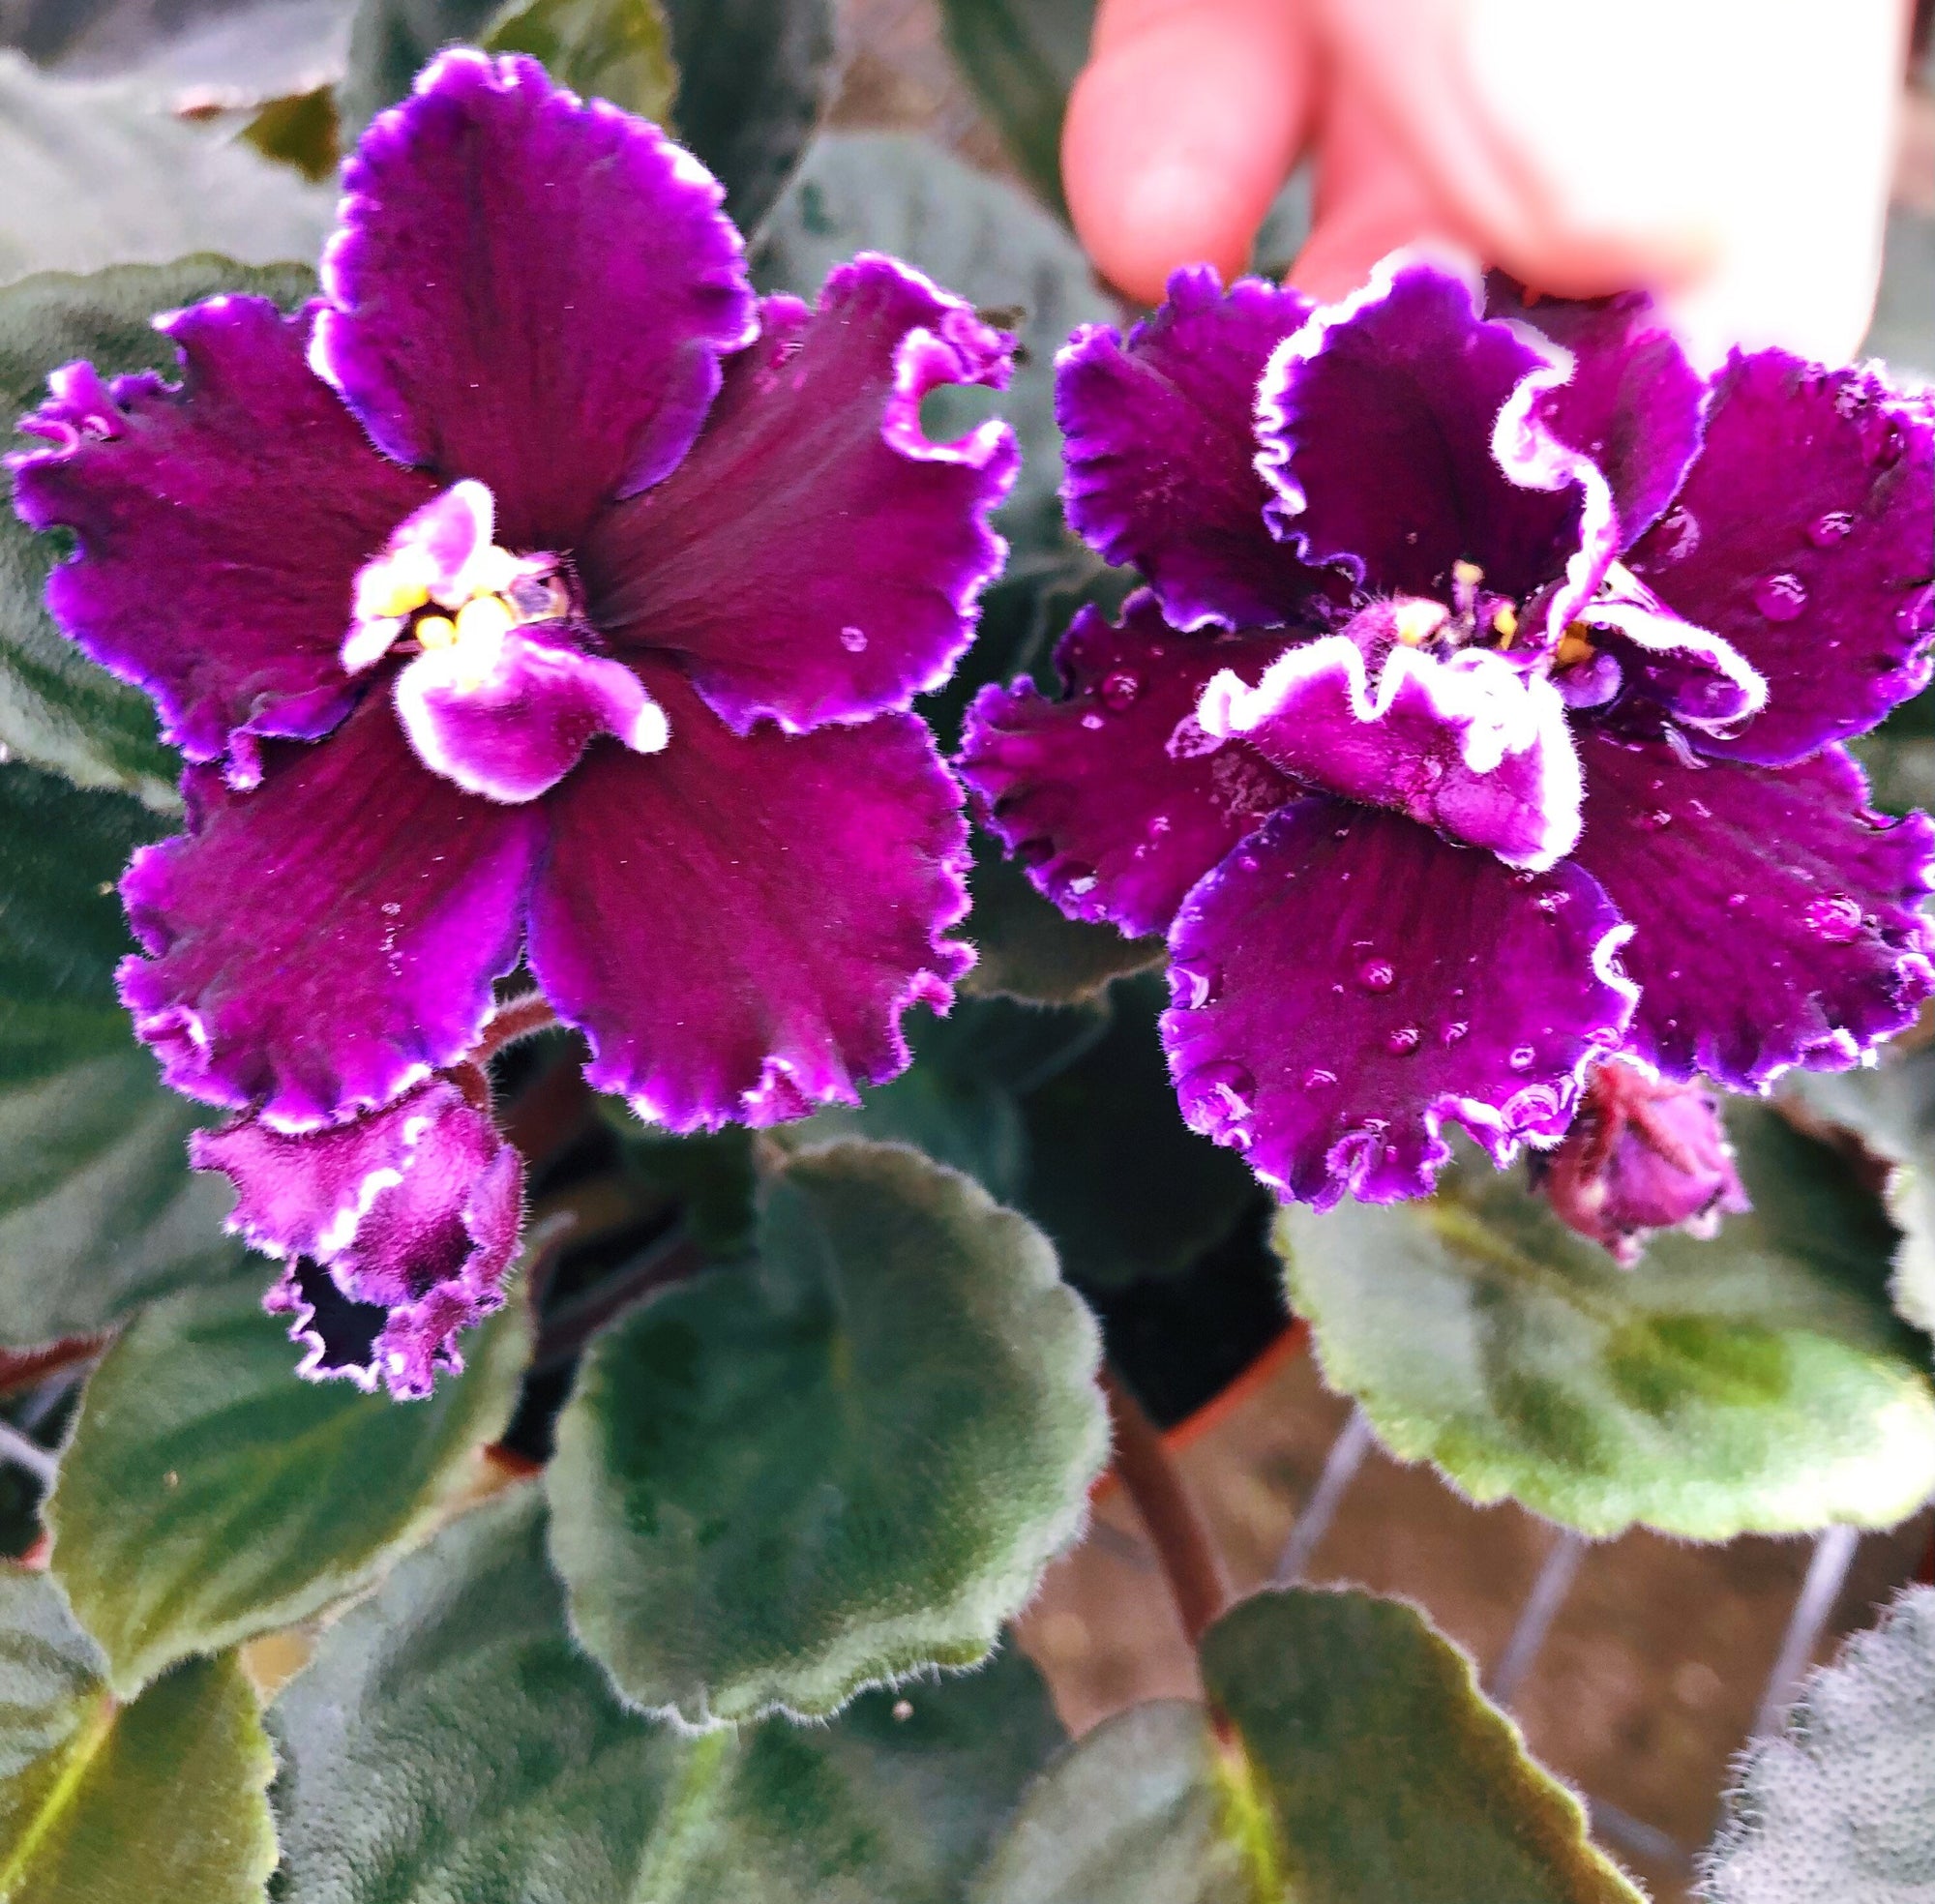 Live house plant variegated African Violet Harmony’s ‘Edge of Darkness’ garden 4” flower Potted gift